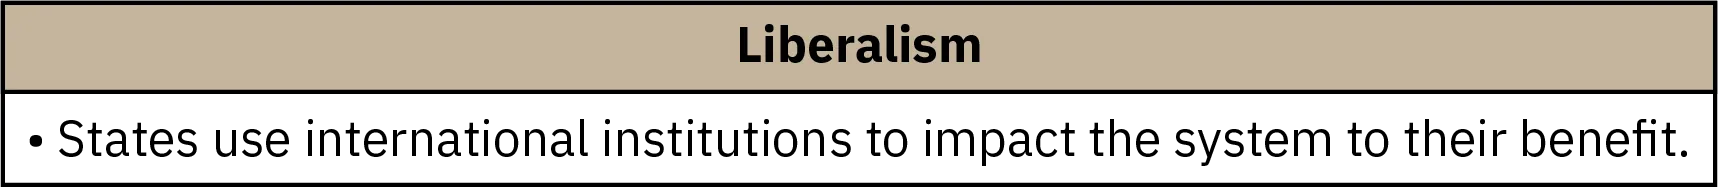 One bulleted point appears in a horizontal box under the heading Liberalism. The point reads States use international institutions to impact the system to their benefit.